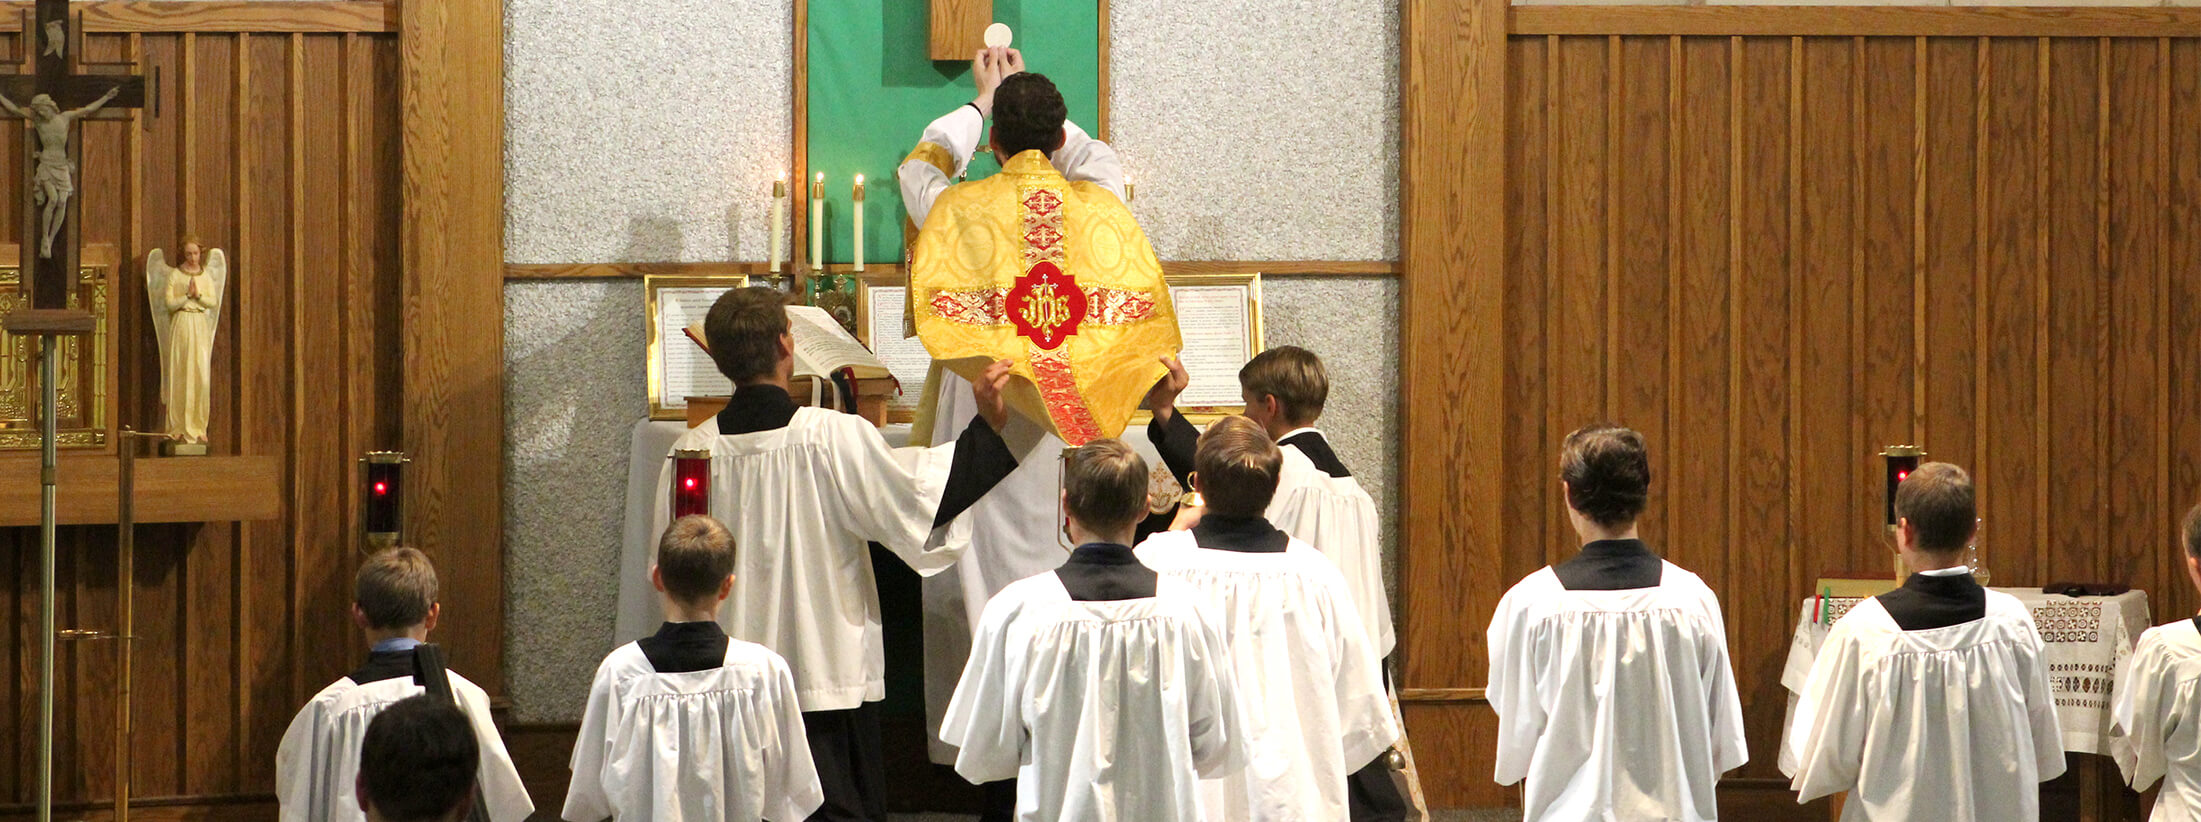 Father holding up the Holy Eucharist to the cross with altar boys behind him